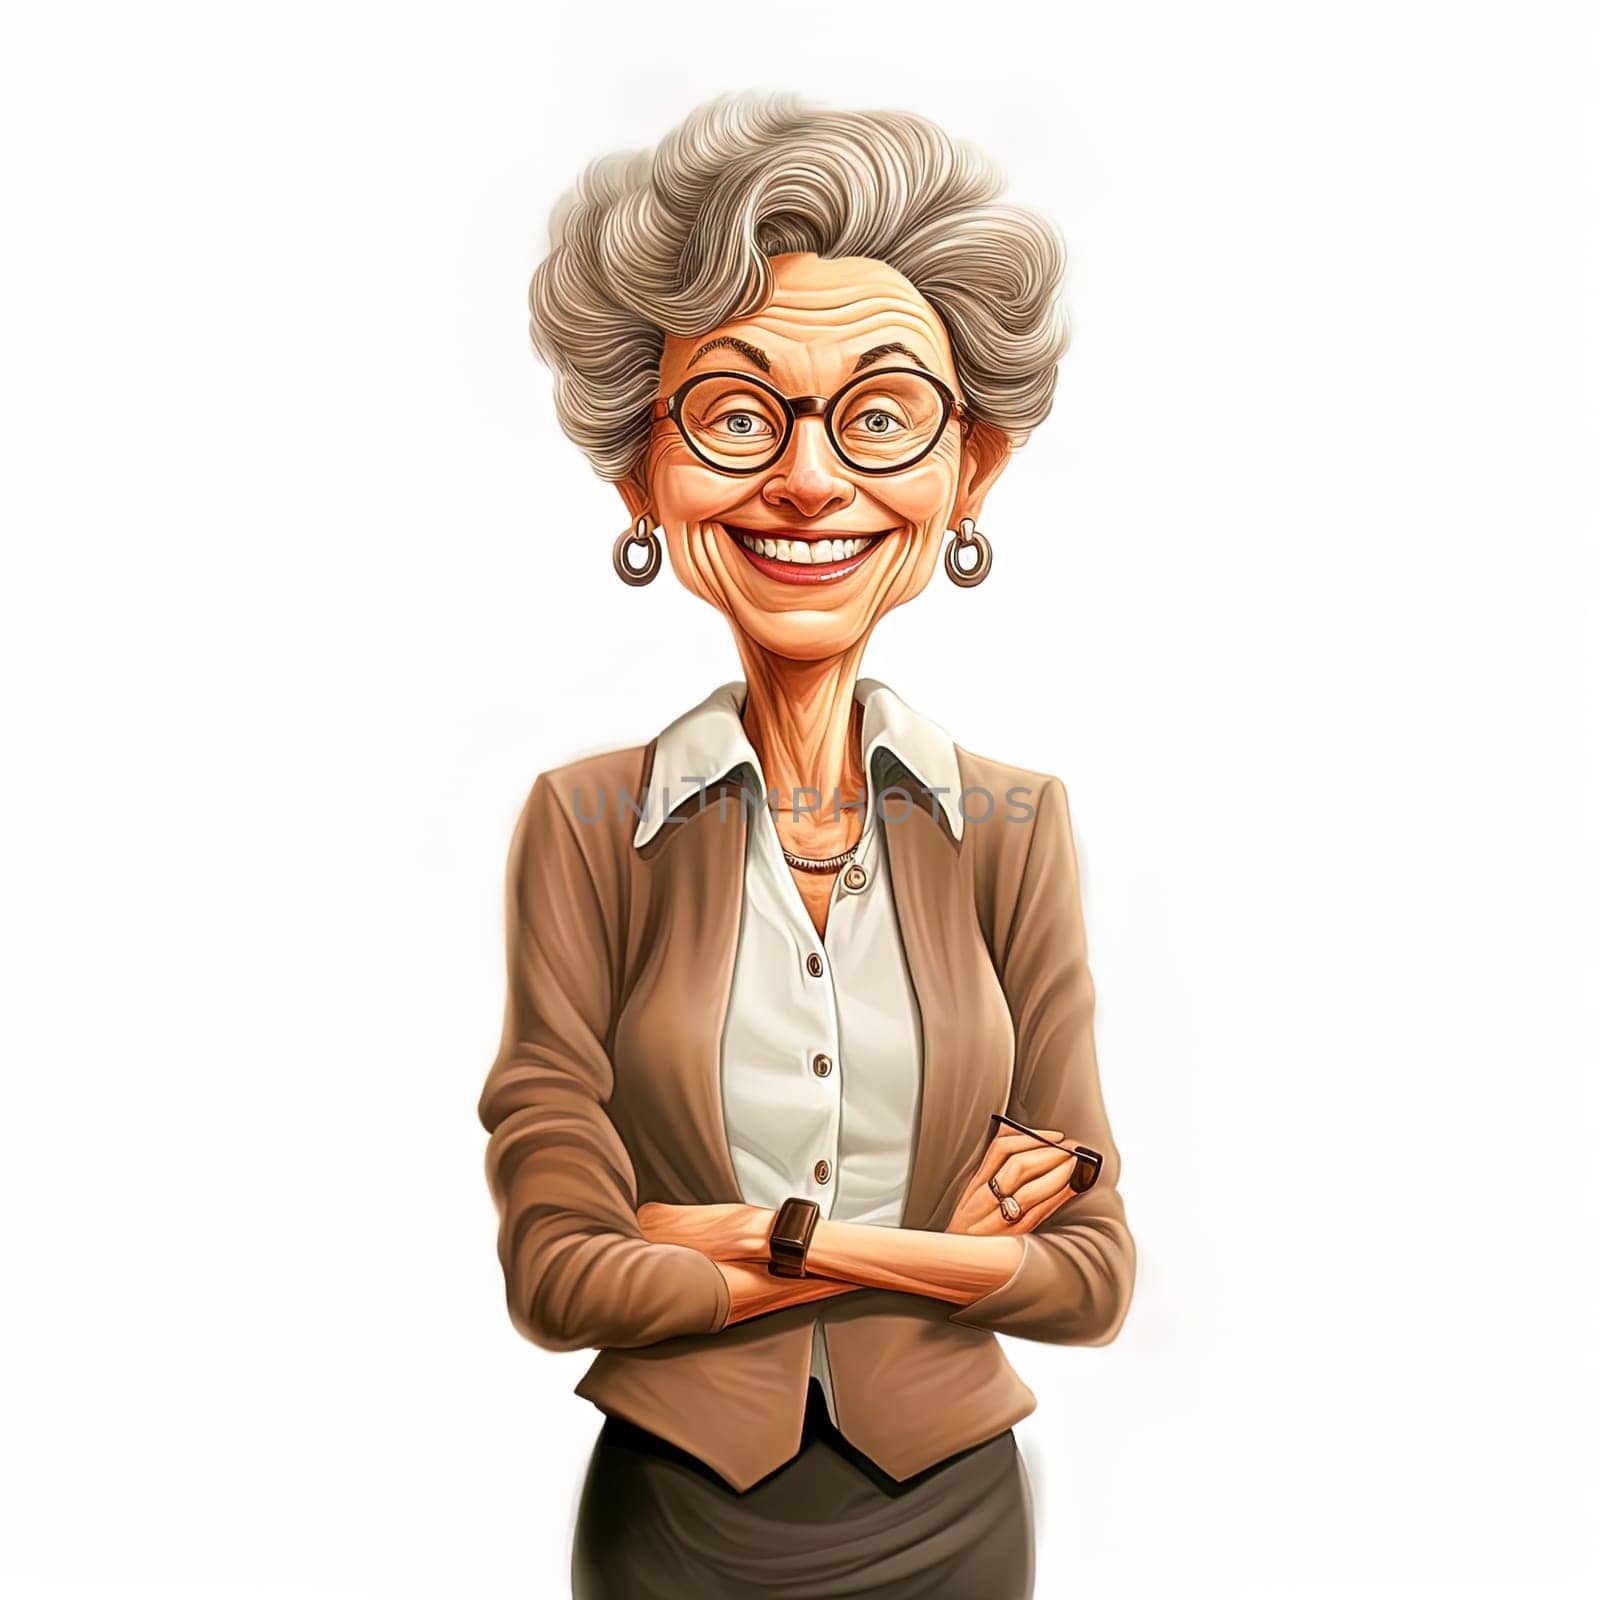 Illustration of a cheerful, mature, thin primary school teacher. The concept of school education. High quality illustration